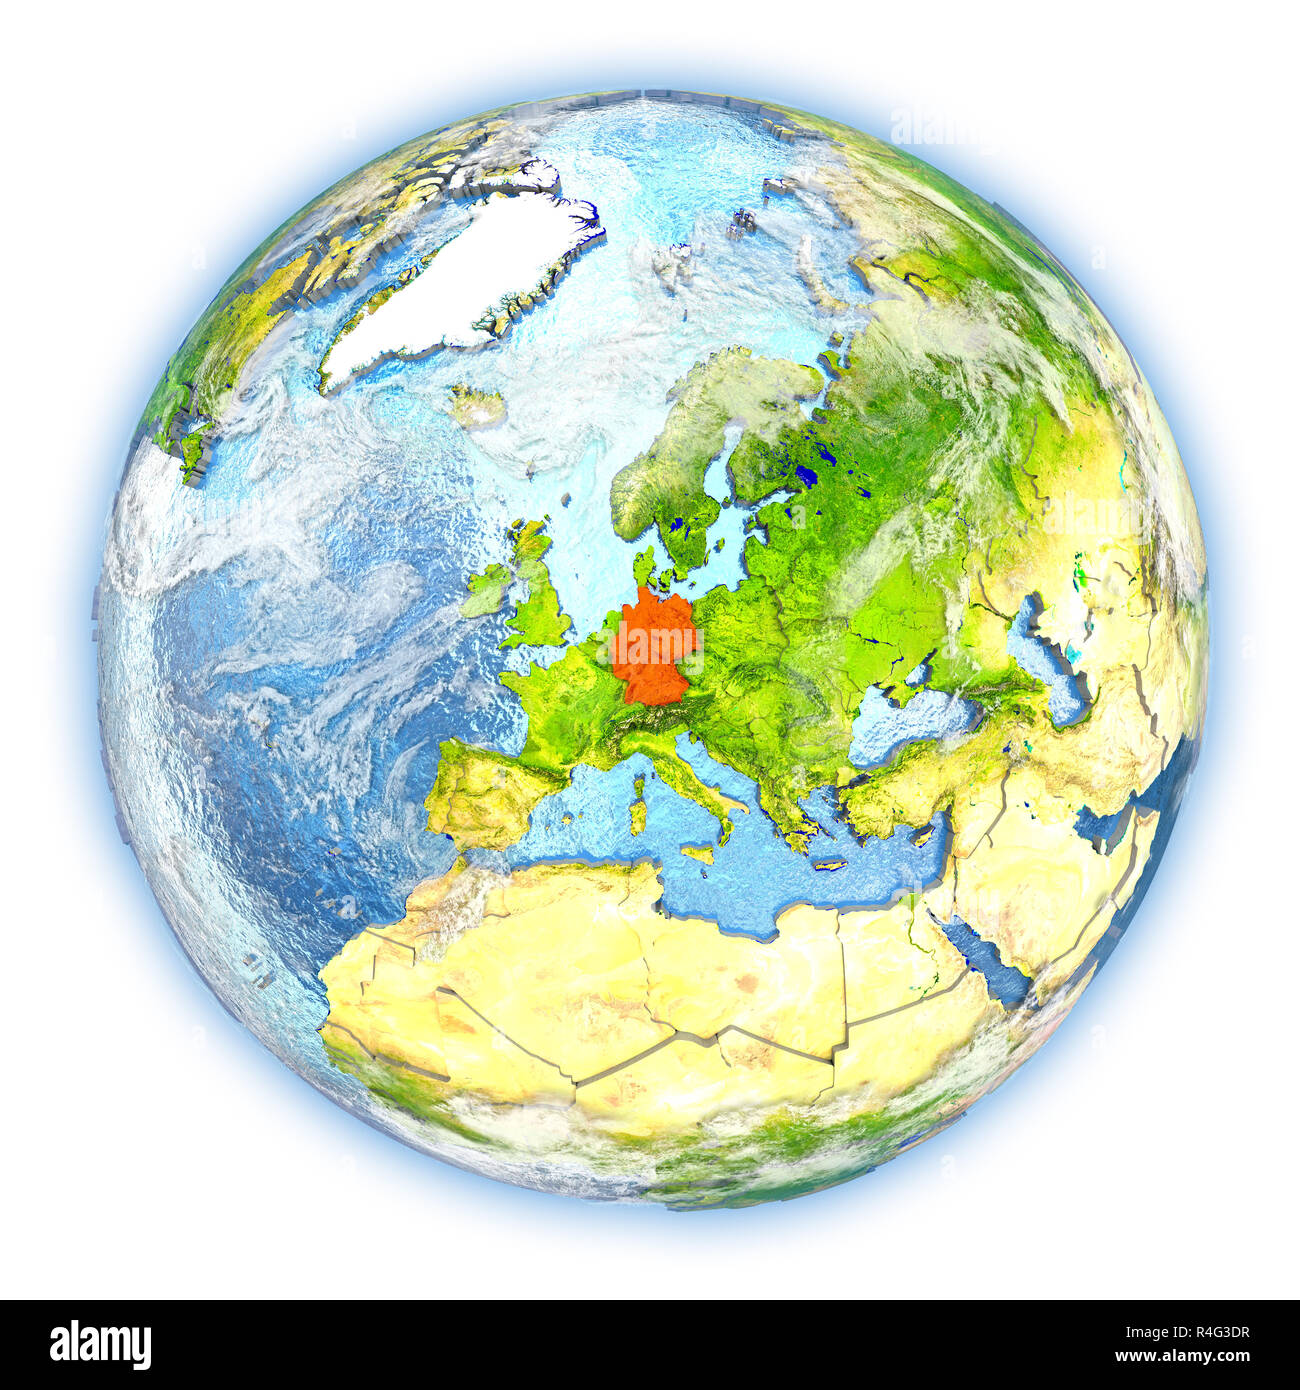 Germany on Earth isolated Stock Photo